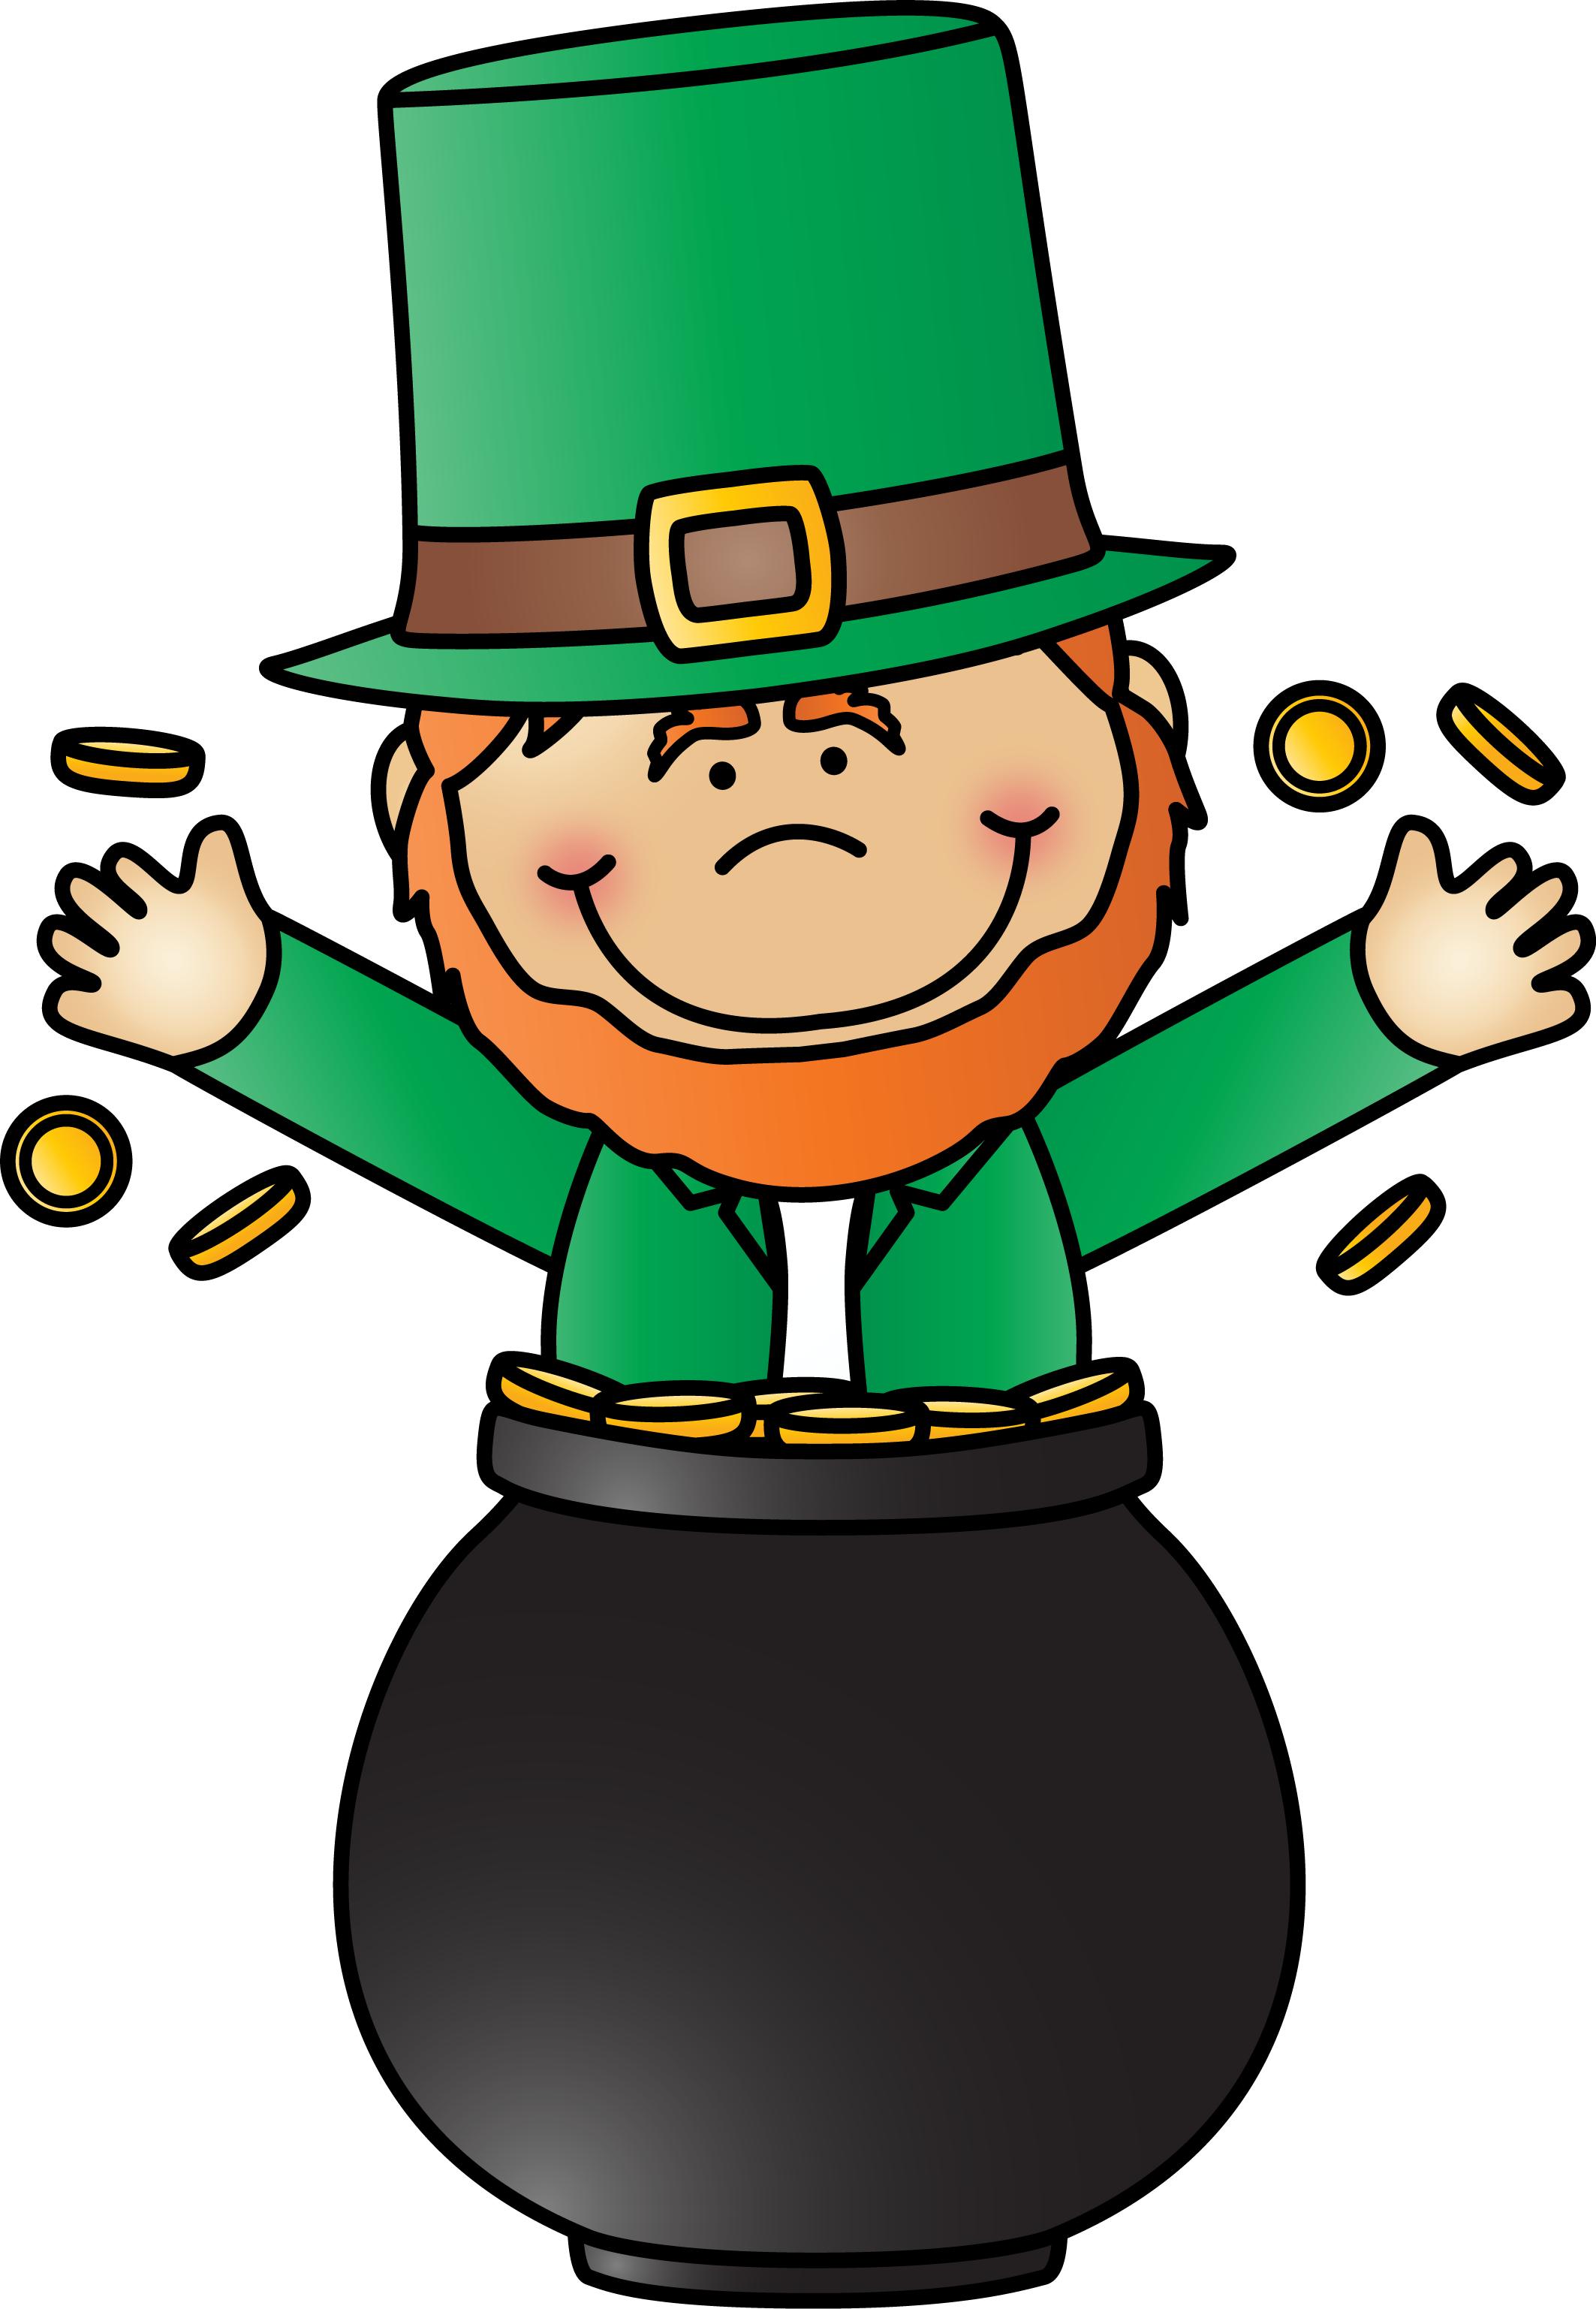 leprechaun-gold_WhimsyClips.png